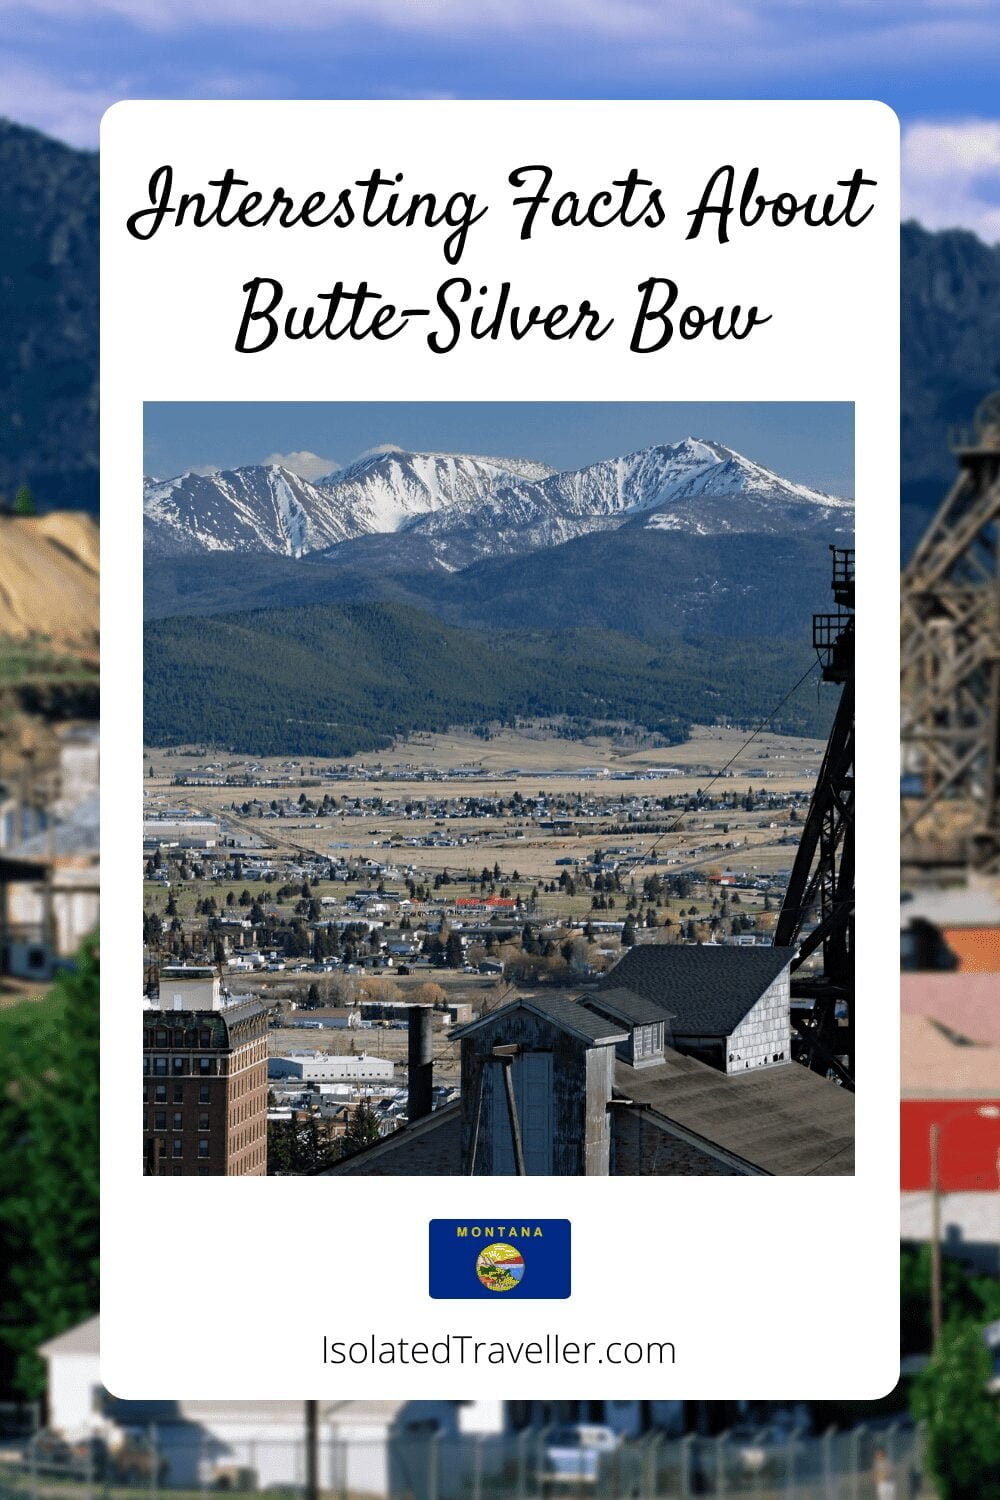 Facts About Butte-Silver Bow